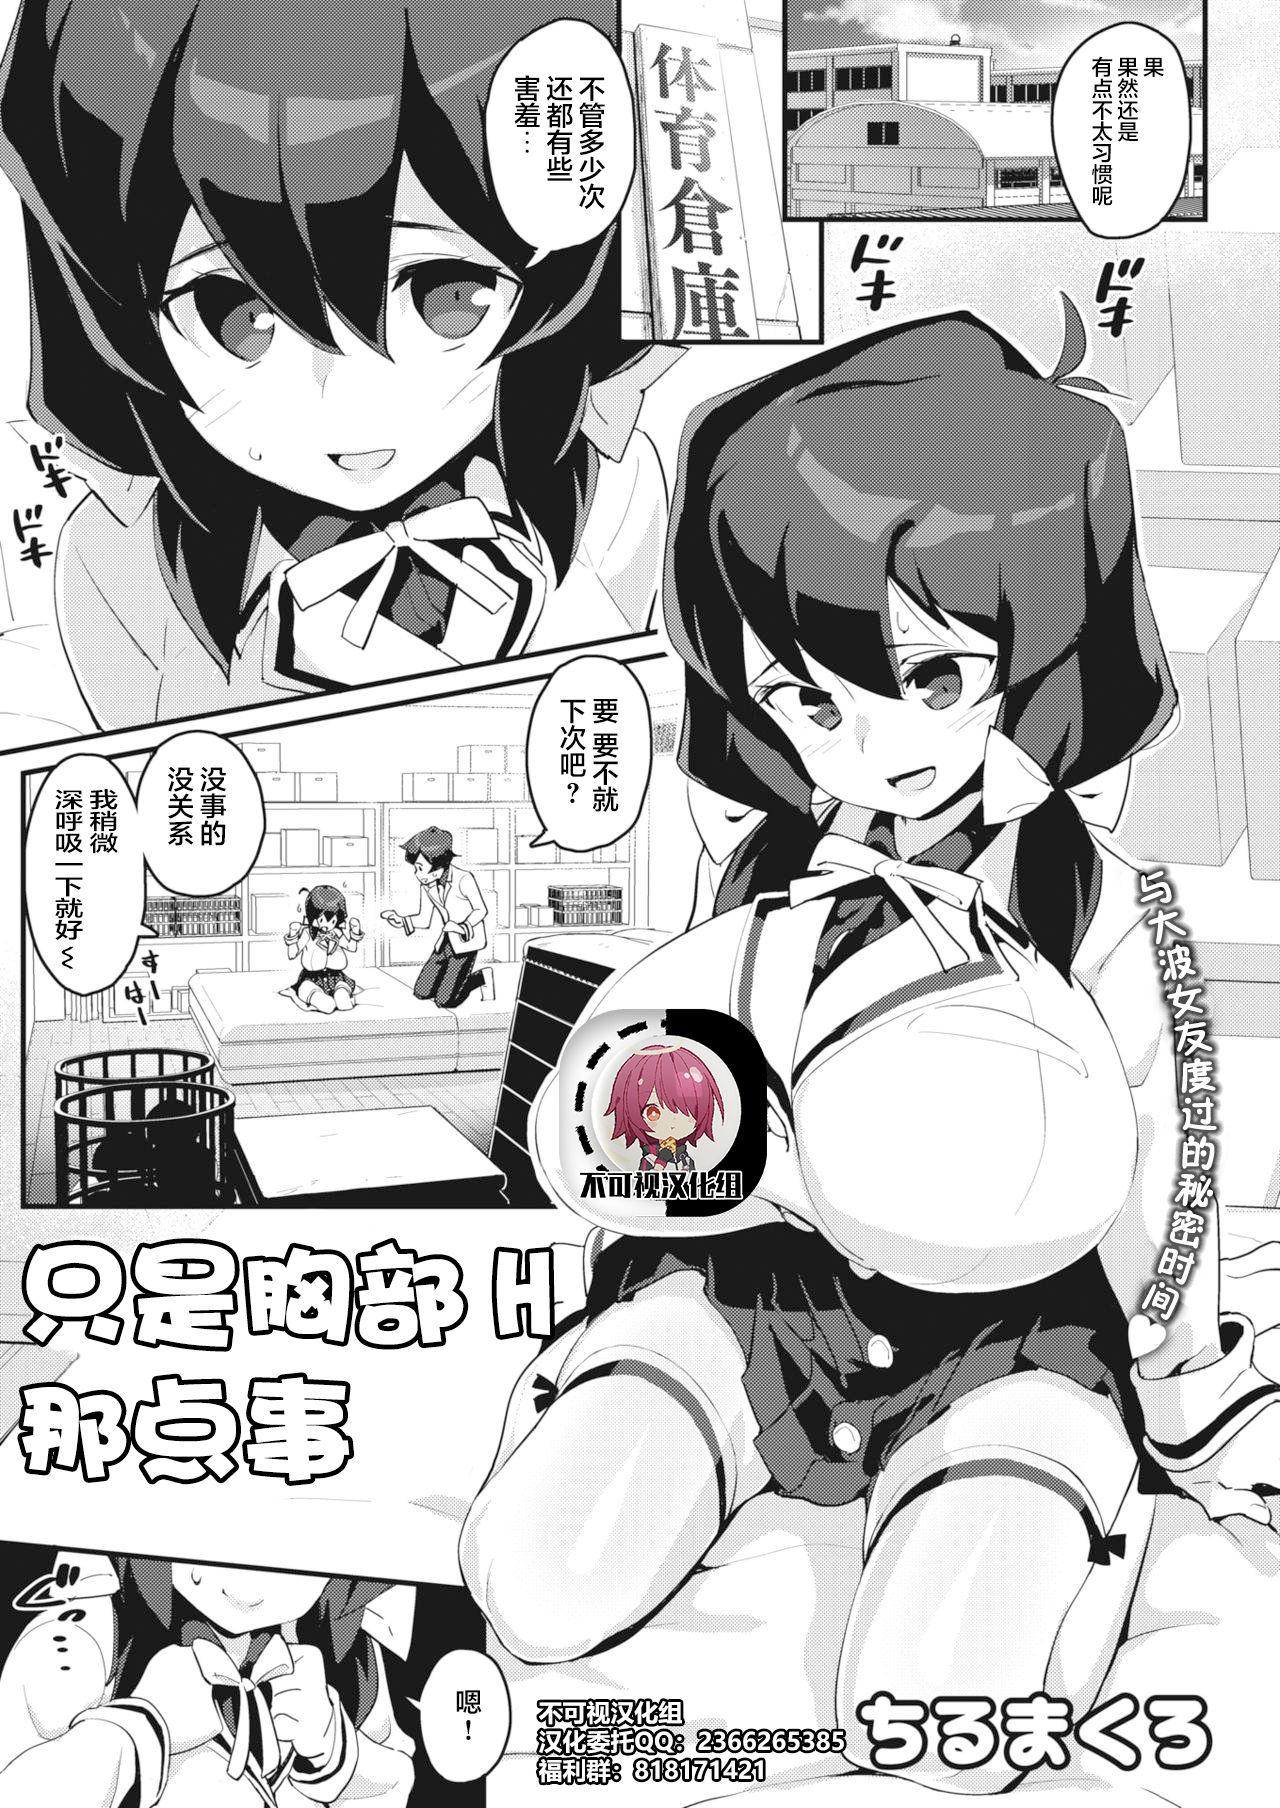 Interracial Hardcore [Chirumakuro] Oppai H dake no Kankei | A Relationship with Lewd Boobs Only! (COMIC HOTMILK 2021-04) [Chinese]【不可视汉化】 Trannies - Page 1